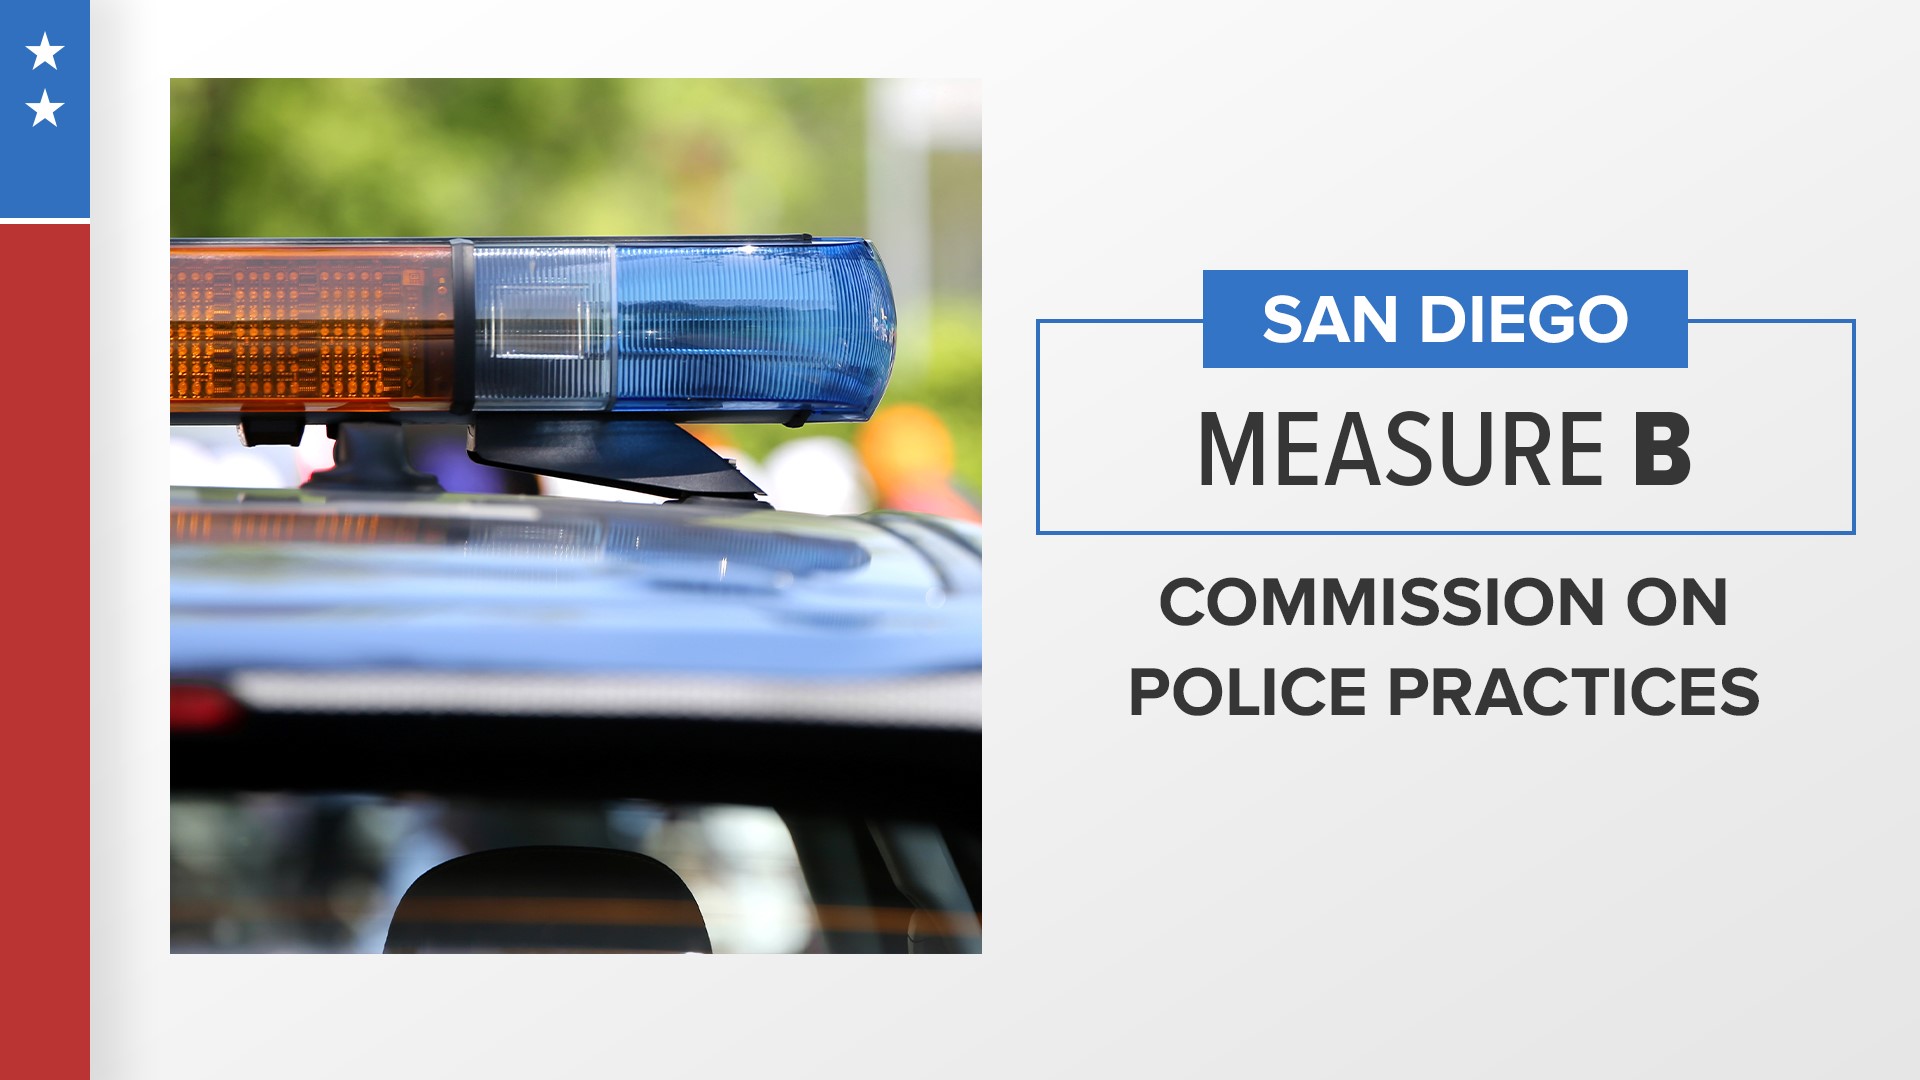 Measure B is on the ballot to allow a change in the San Diego city charter to create an independent police oversight board.